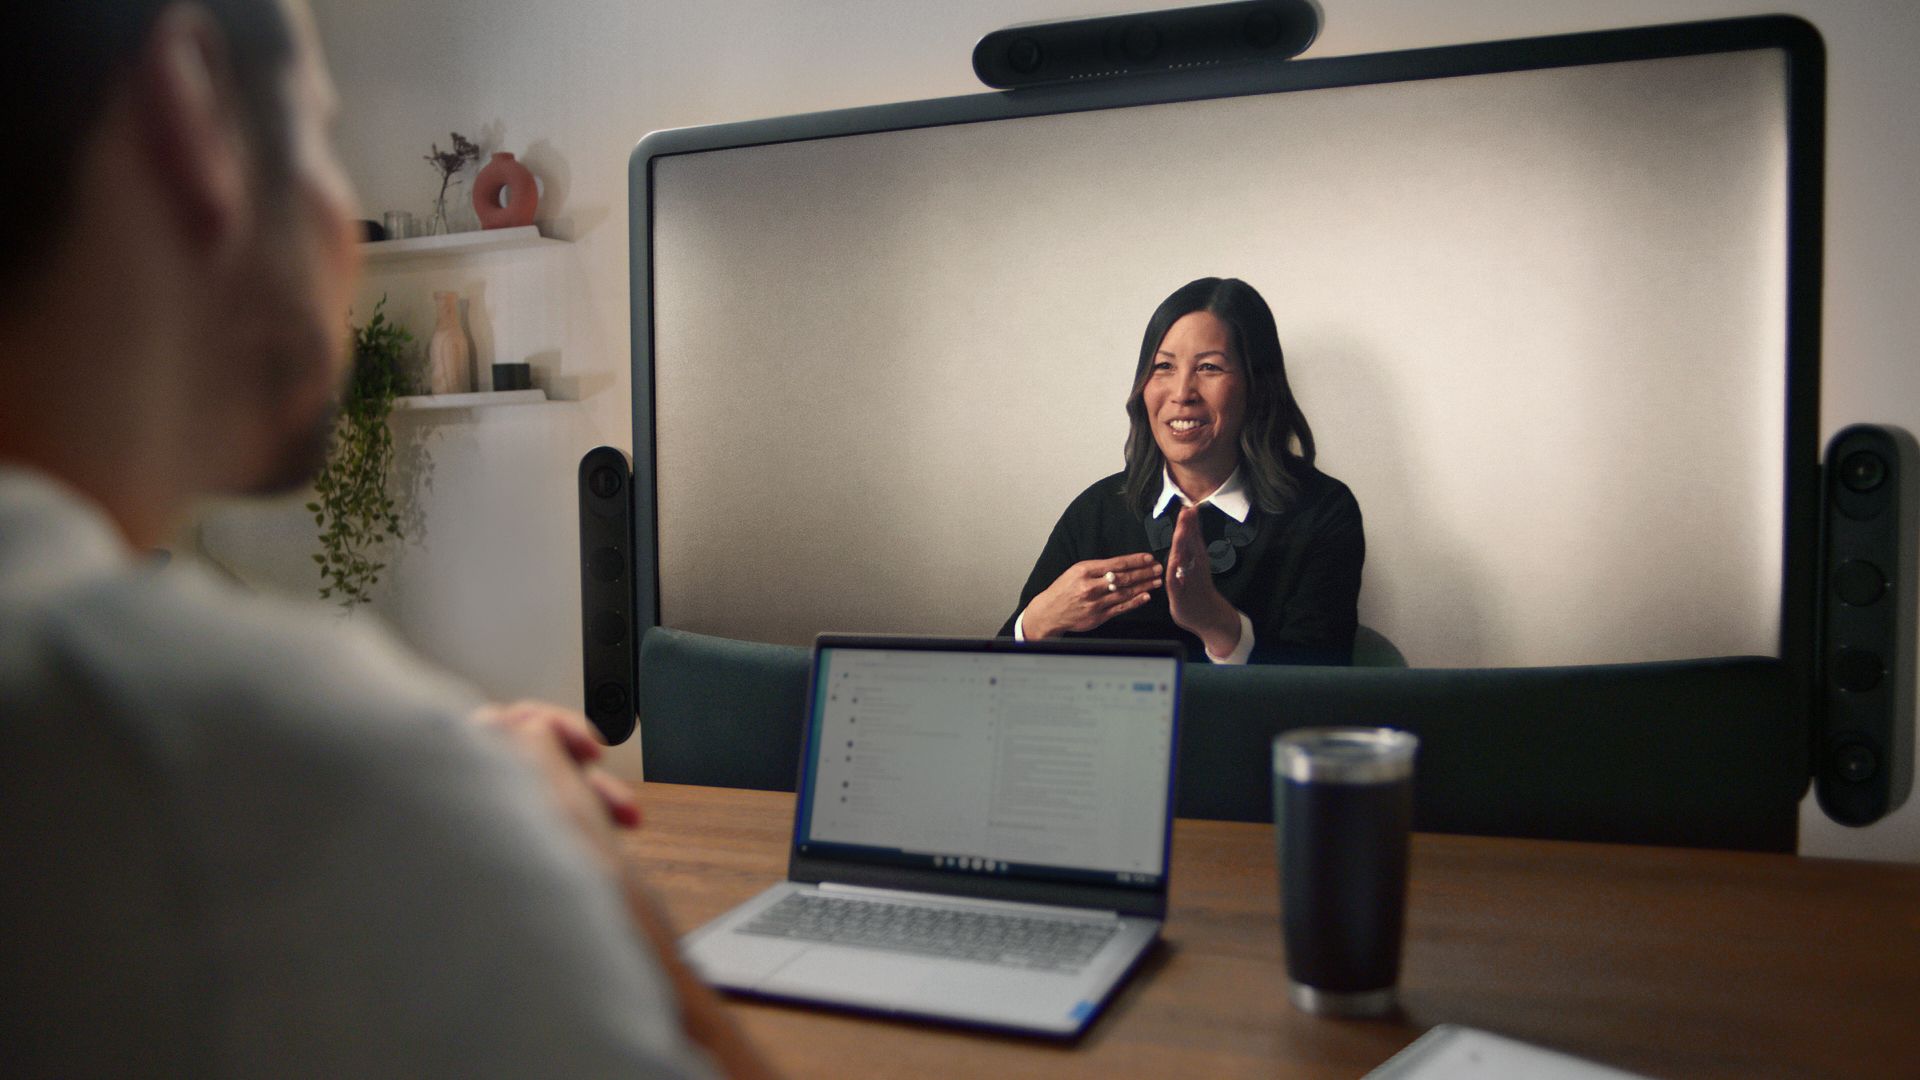 Google's smaller Project Starline video conferencing system